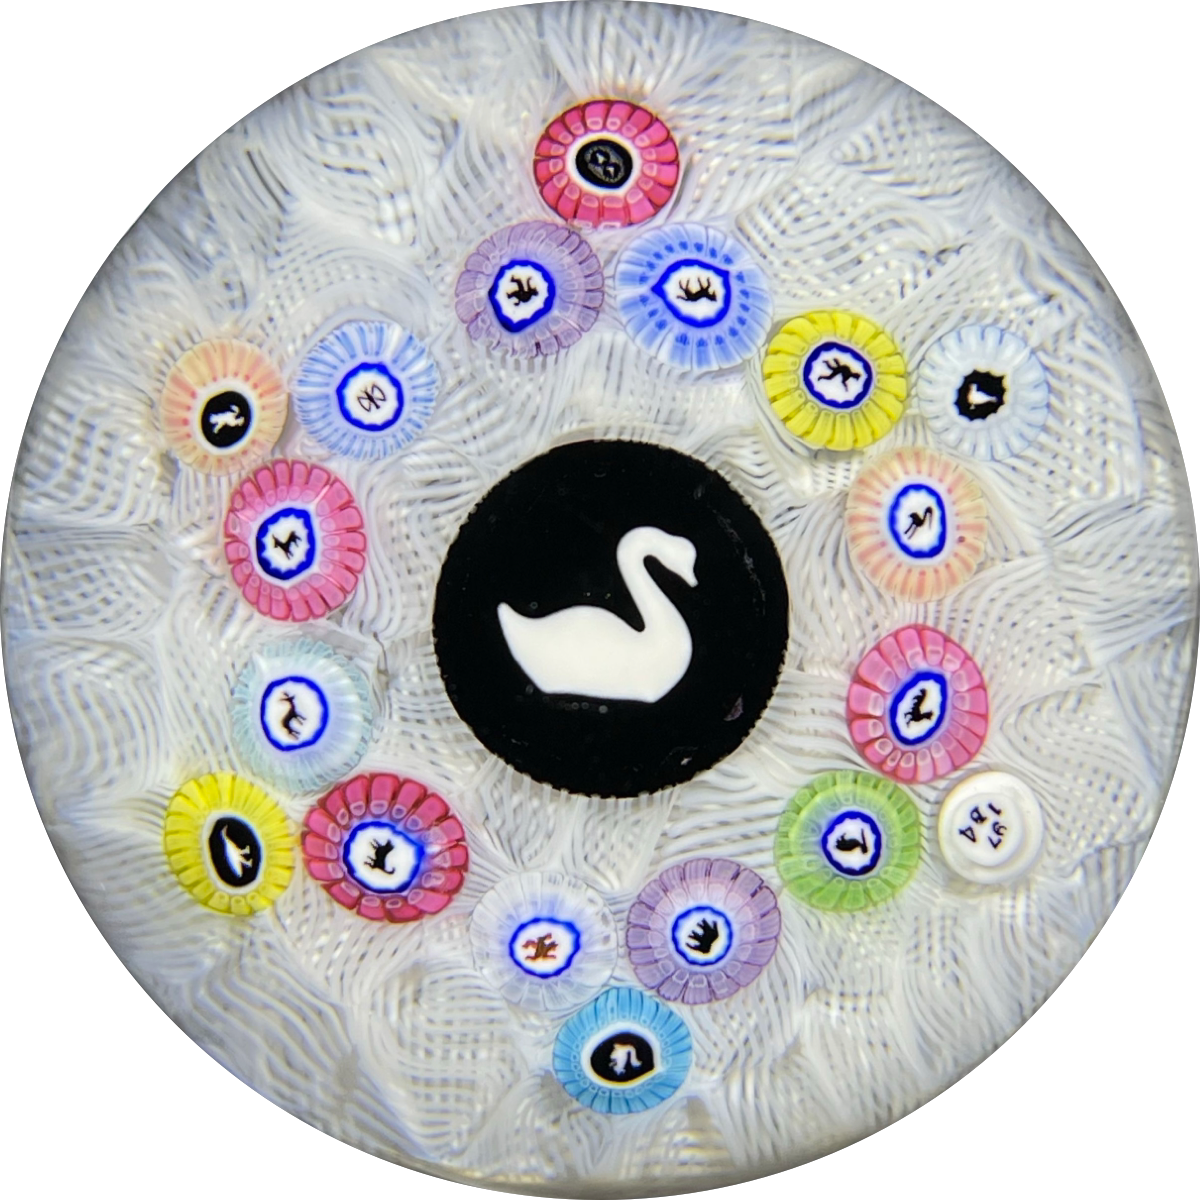 Baccarat Crystal 1974 LE Cygne Blanc Gridel Swan Murrine With 17 Silhouette Canes on Upset White Muslin Lace